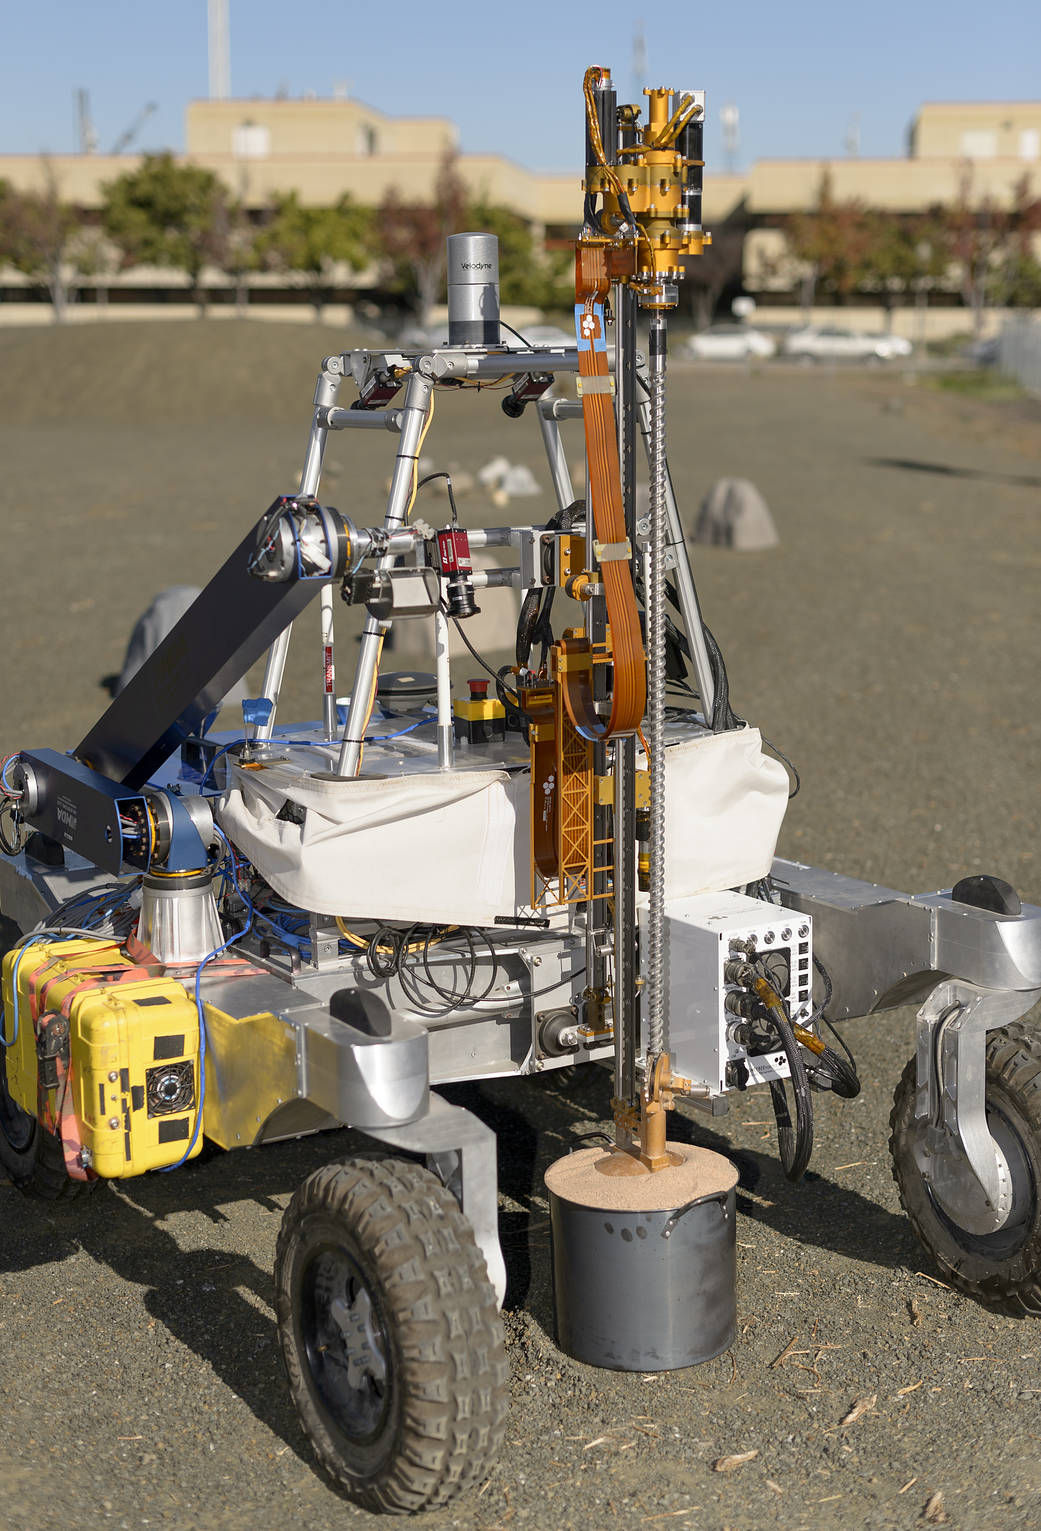 The ARADS rover is seen with its drill position over a large pot of simulated desert soil.